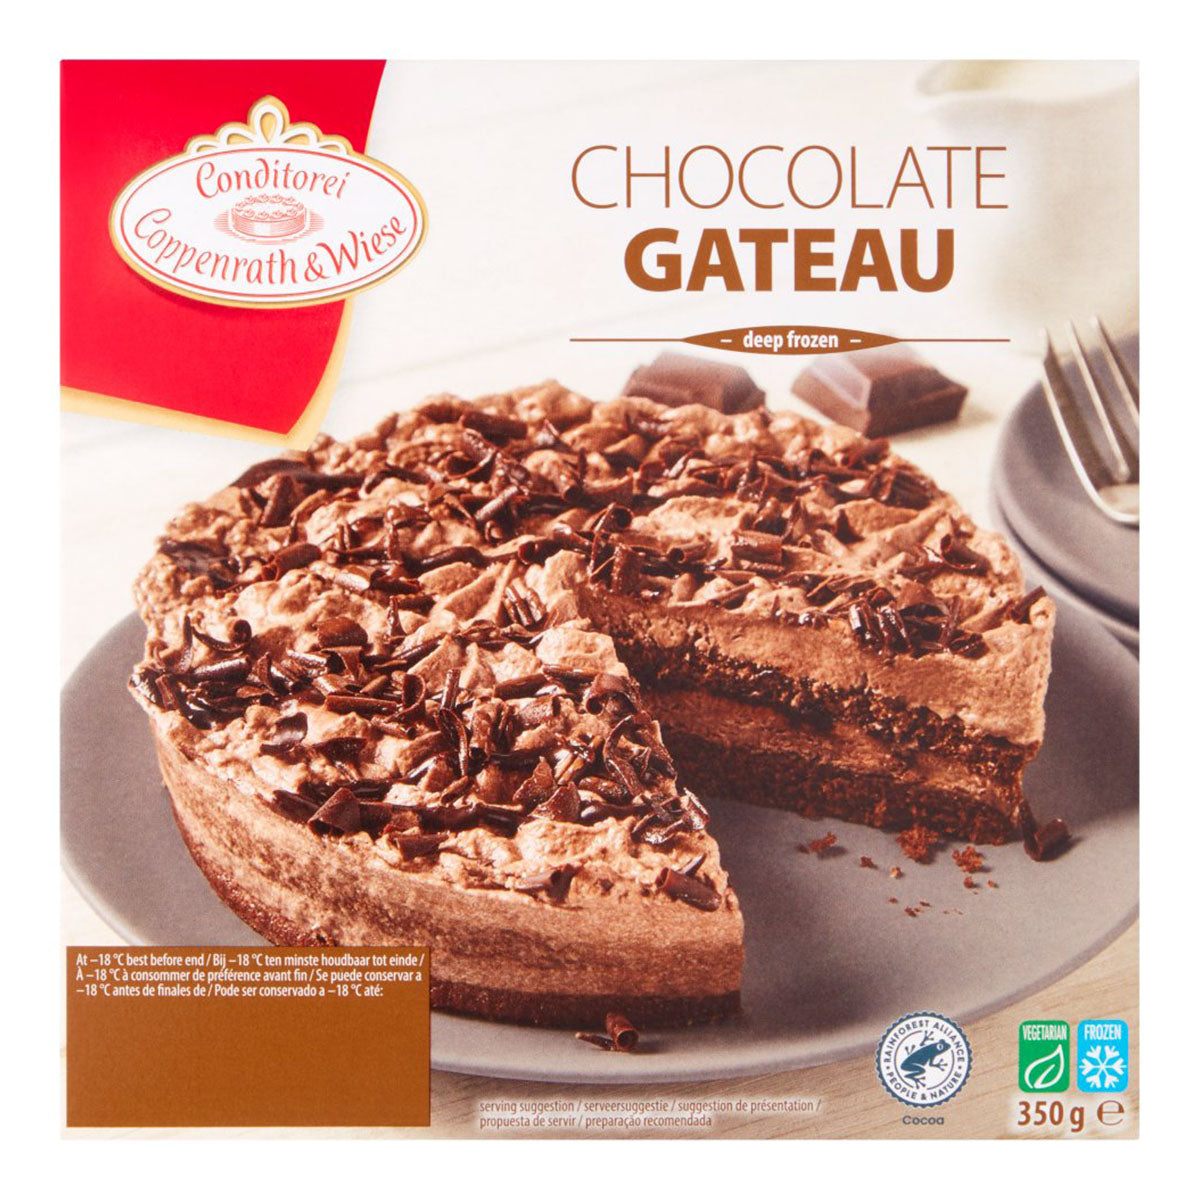 Conditorei Coppenrath & Wiese - Chocolate Gateau - 350g - Continental Food Store